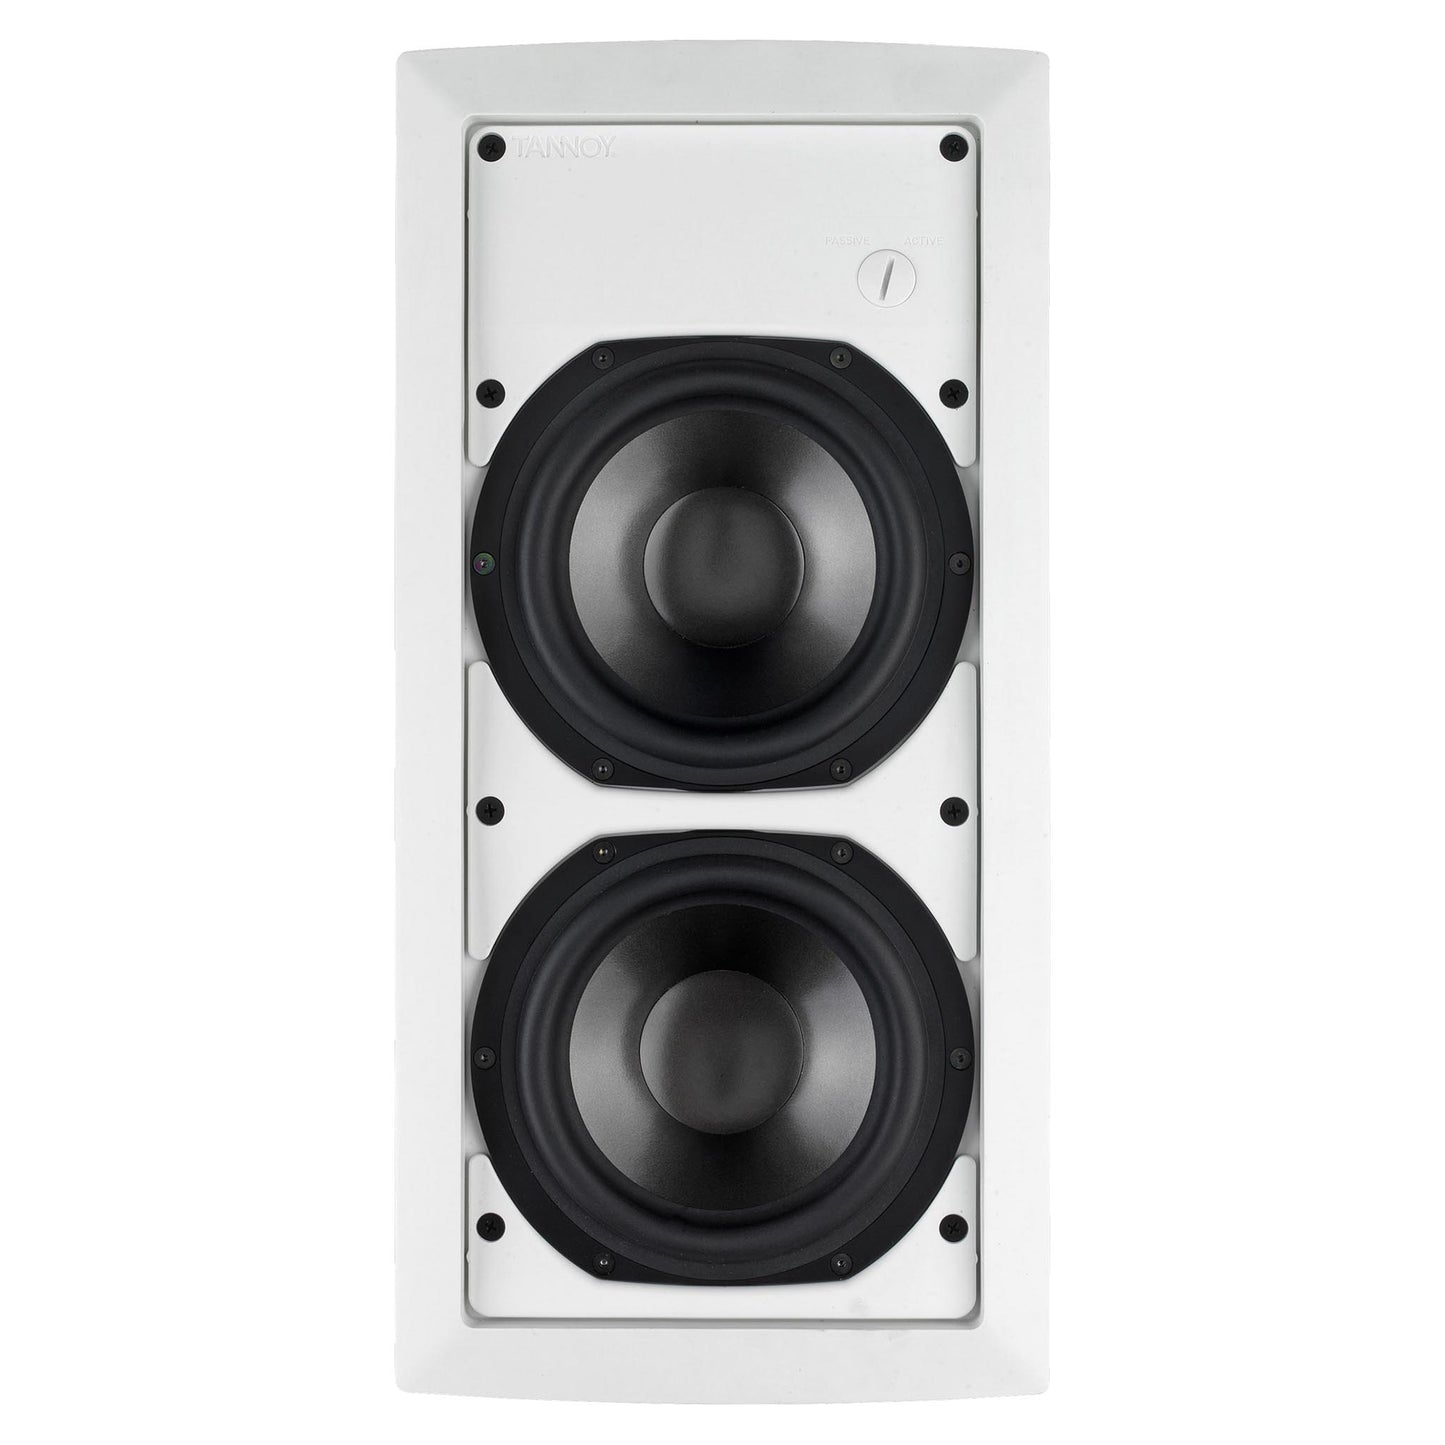 Tannoy iW 62TS In-Wall Subwoofer